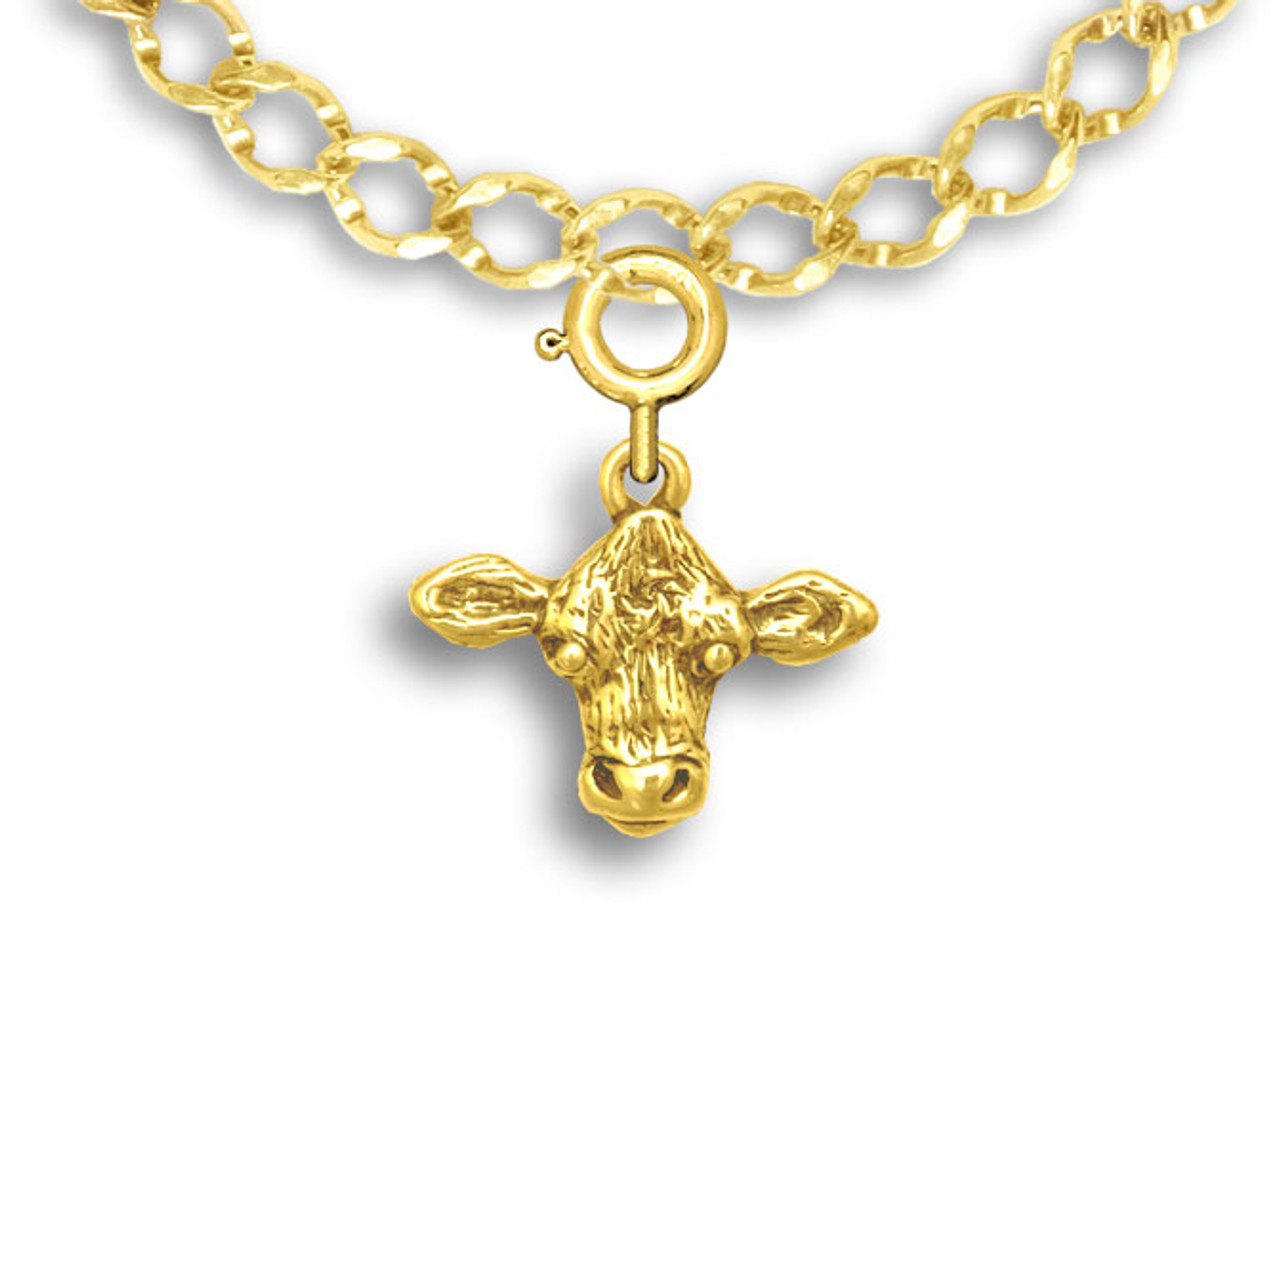 14K Solid Gold Cow Charm- Cow Charms - Cow Jewelry